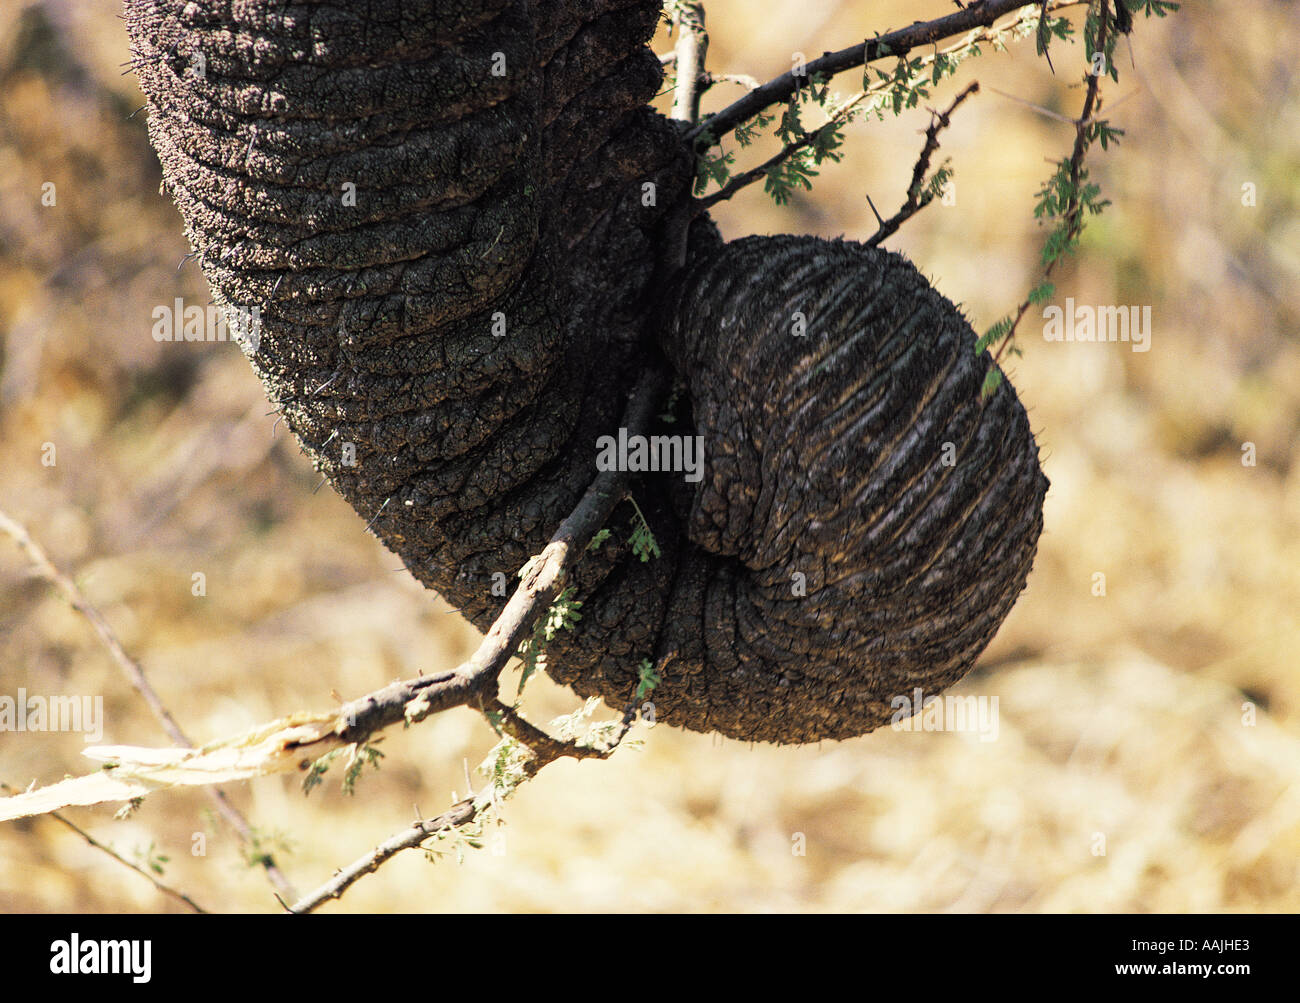 Close up of elephant s trunk holding a piece of acacia tree Stock Photo